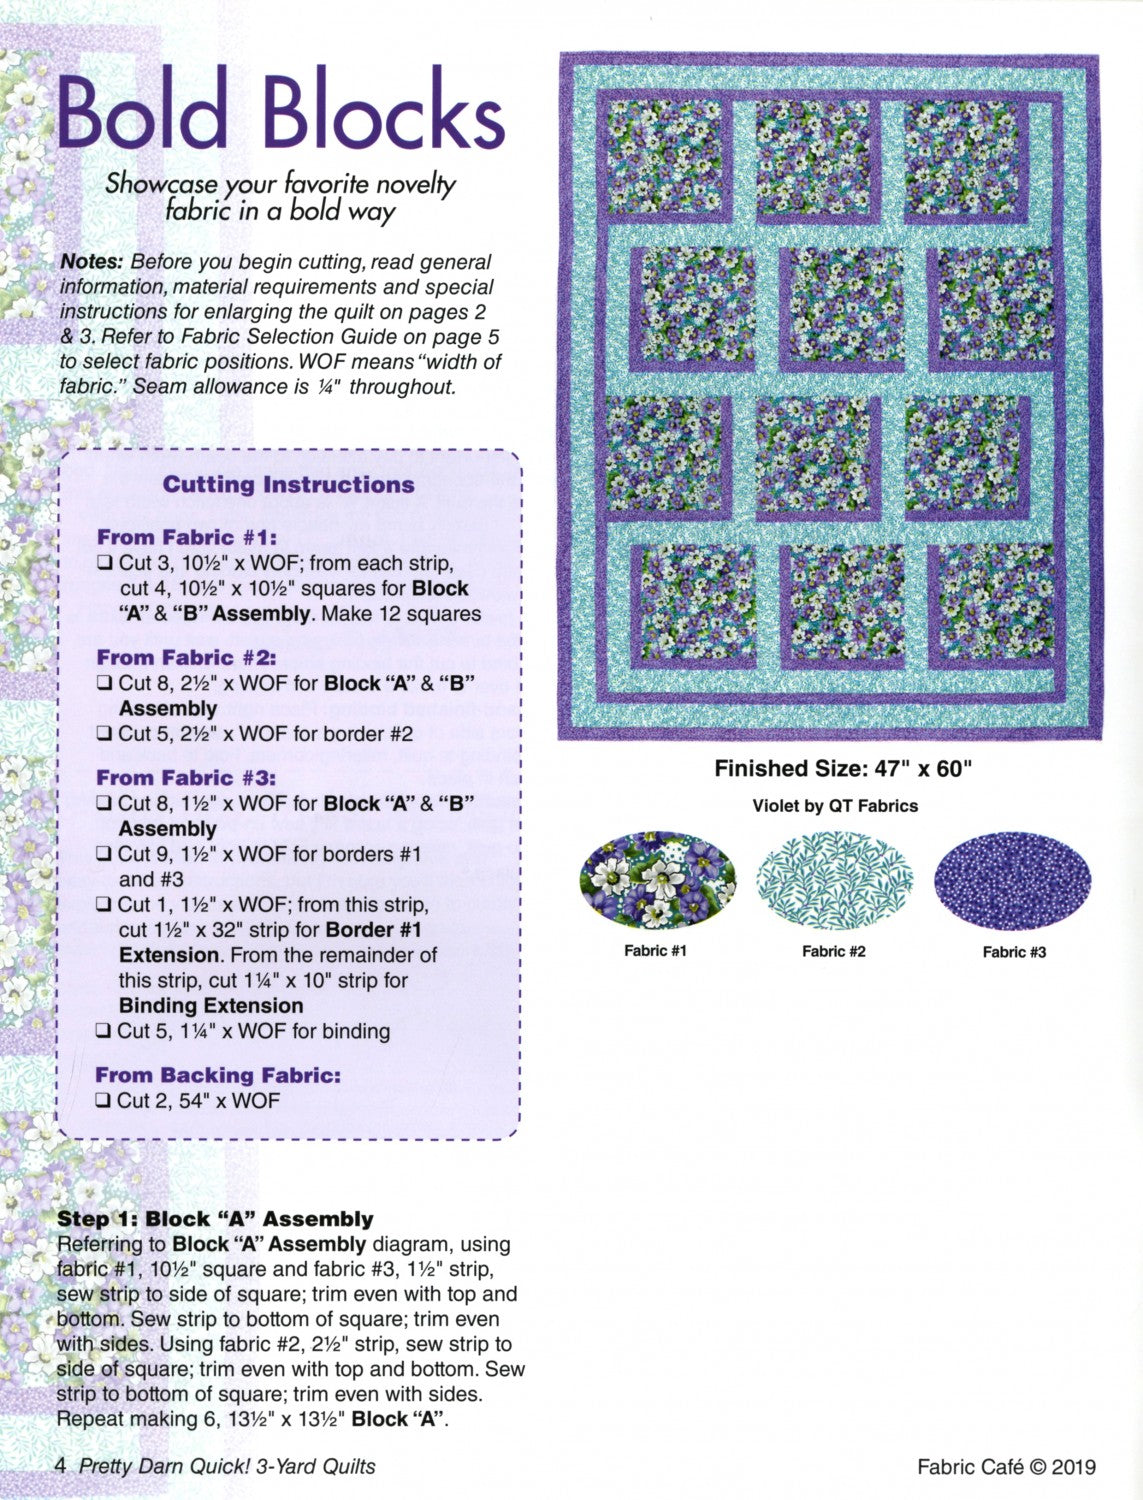 Pretty Darn Quick! 3-Yard Quilts-Fast & Easy Quilts